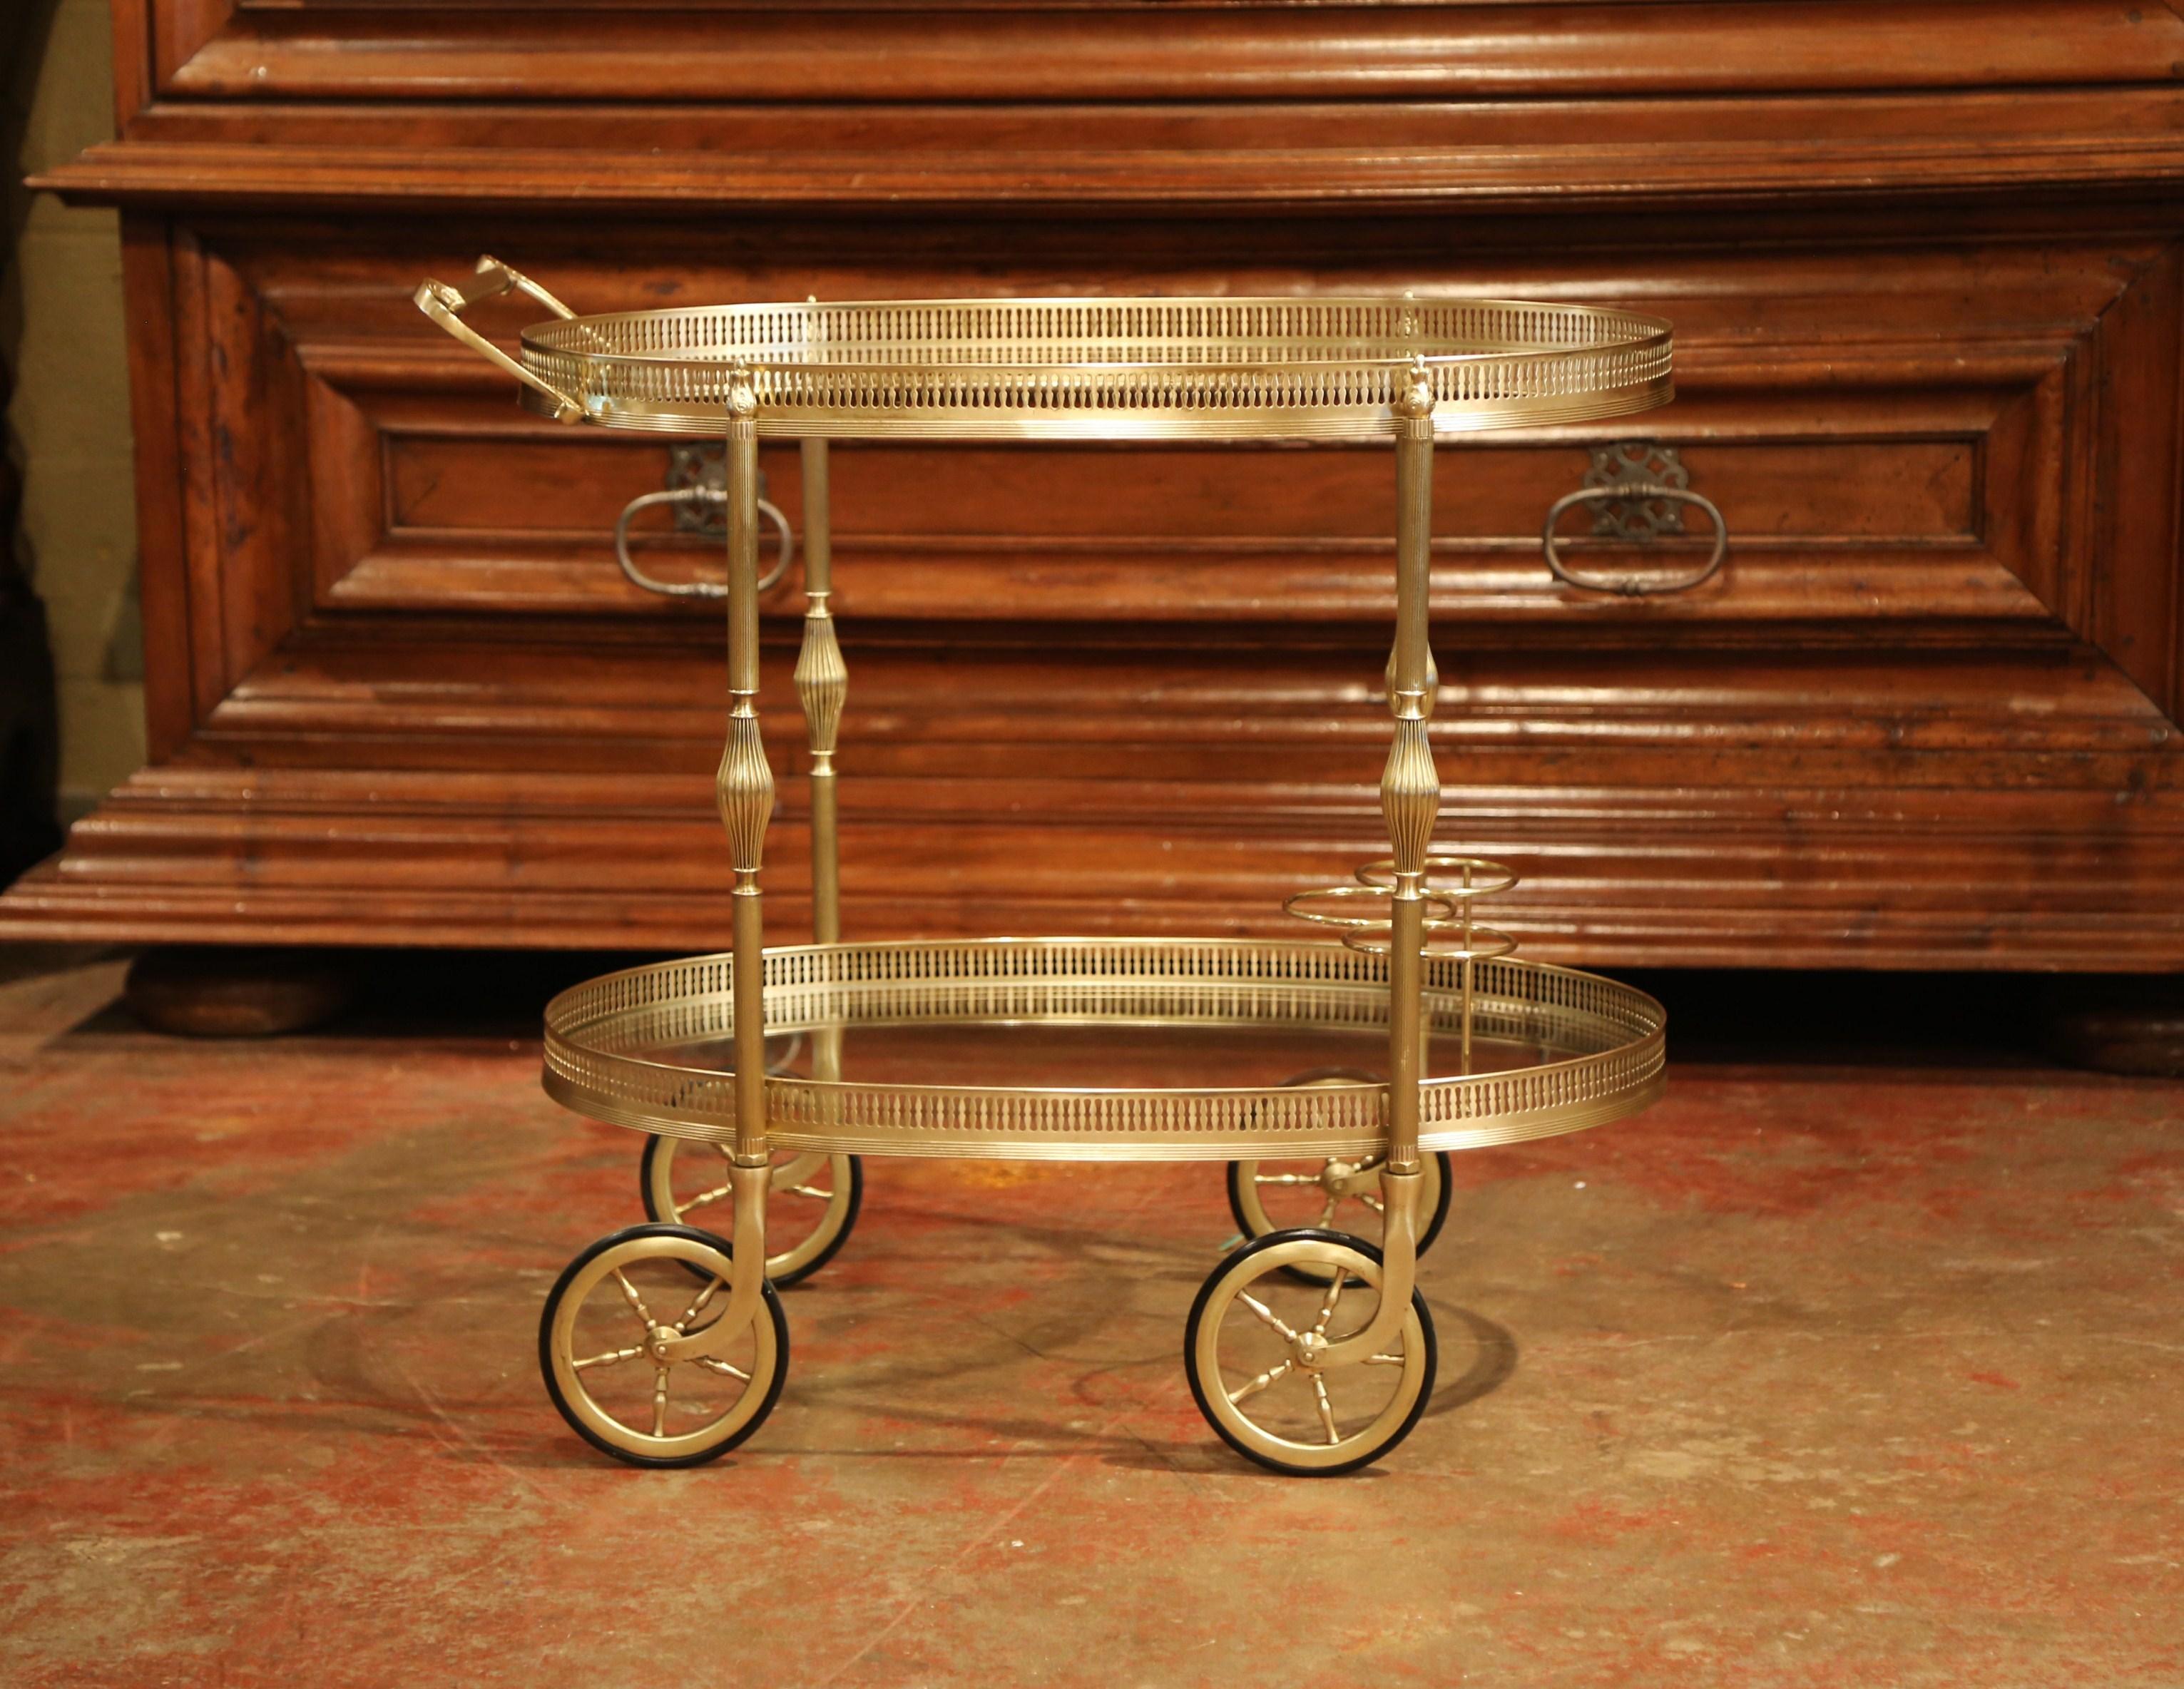 
This beautiful, vintage rolling bar cart was created in France, circa 1930. The desert table has a brass frame, small round wheels with rubber tires, and two plateaux topped with glass surfaces. The top deck features a shaped utilitarian handle, a